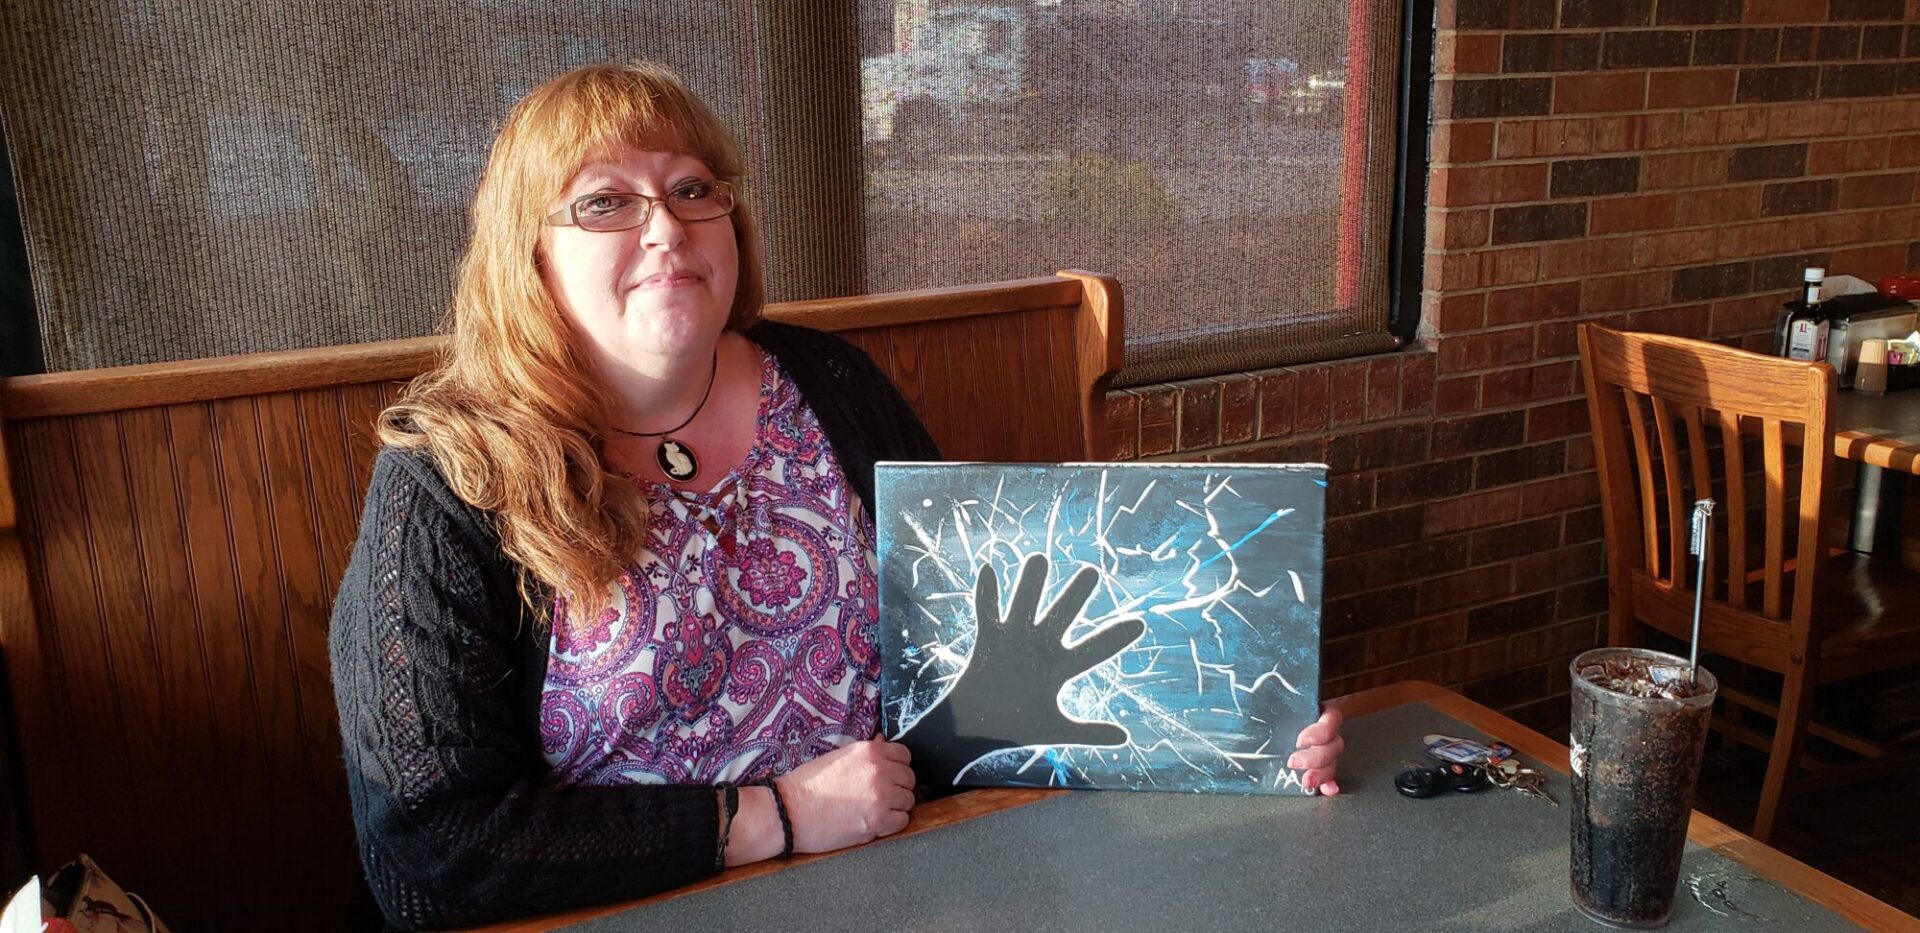 Peninsula patient Andee Anderson shows her first painting of a hand reaching out of the darkness. 